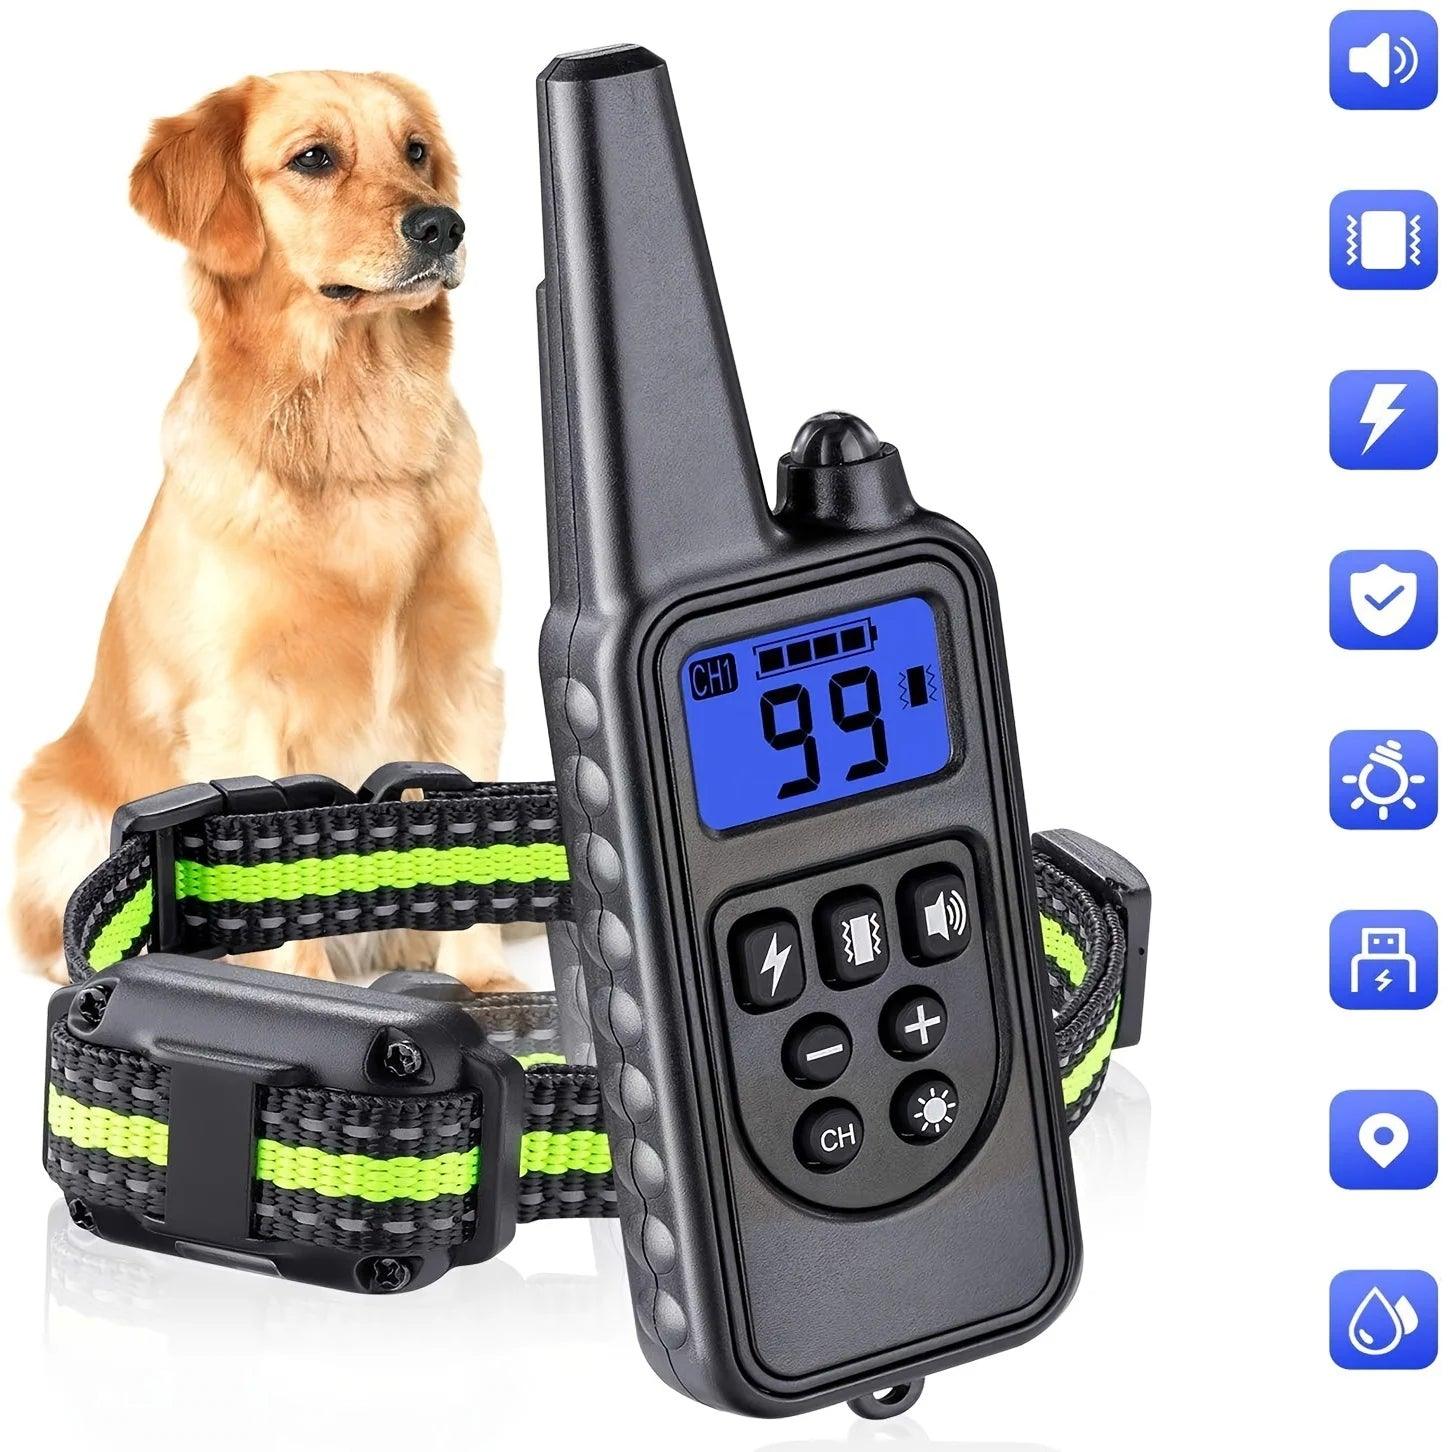 Ultimate Waterproof Dog Training Collar with Remote Control and Adjustable Settings  ourlum.com   